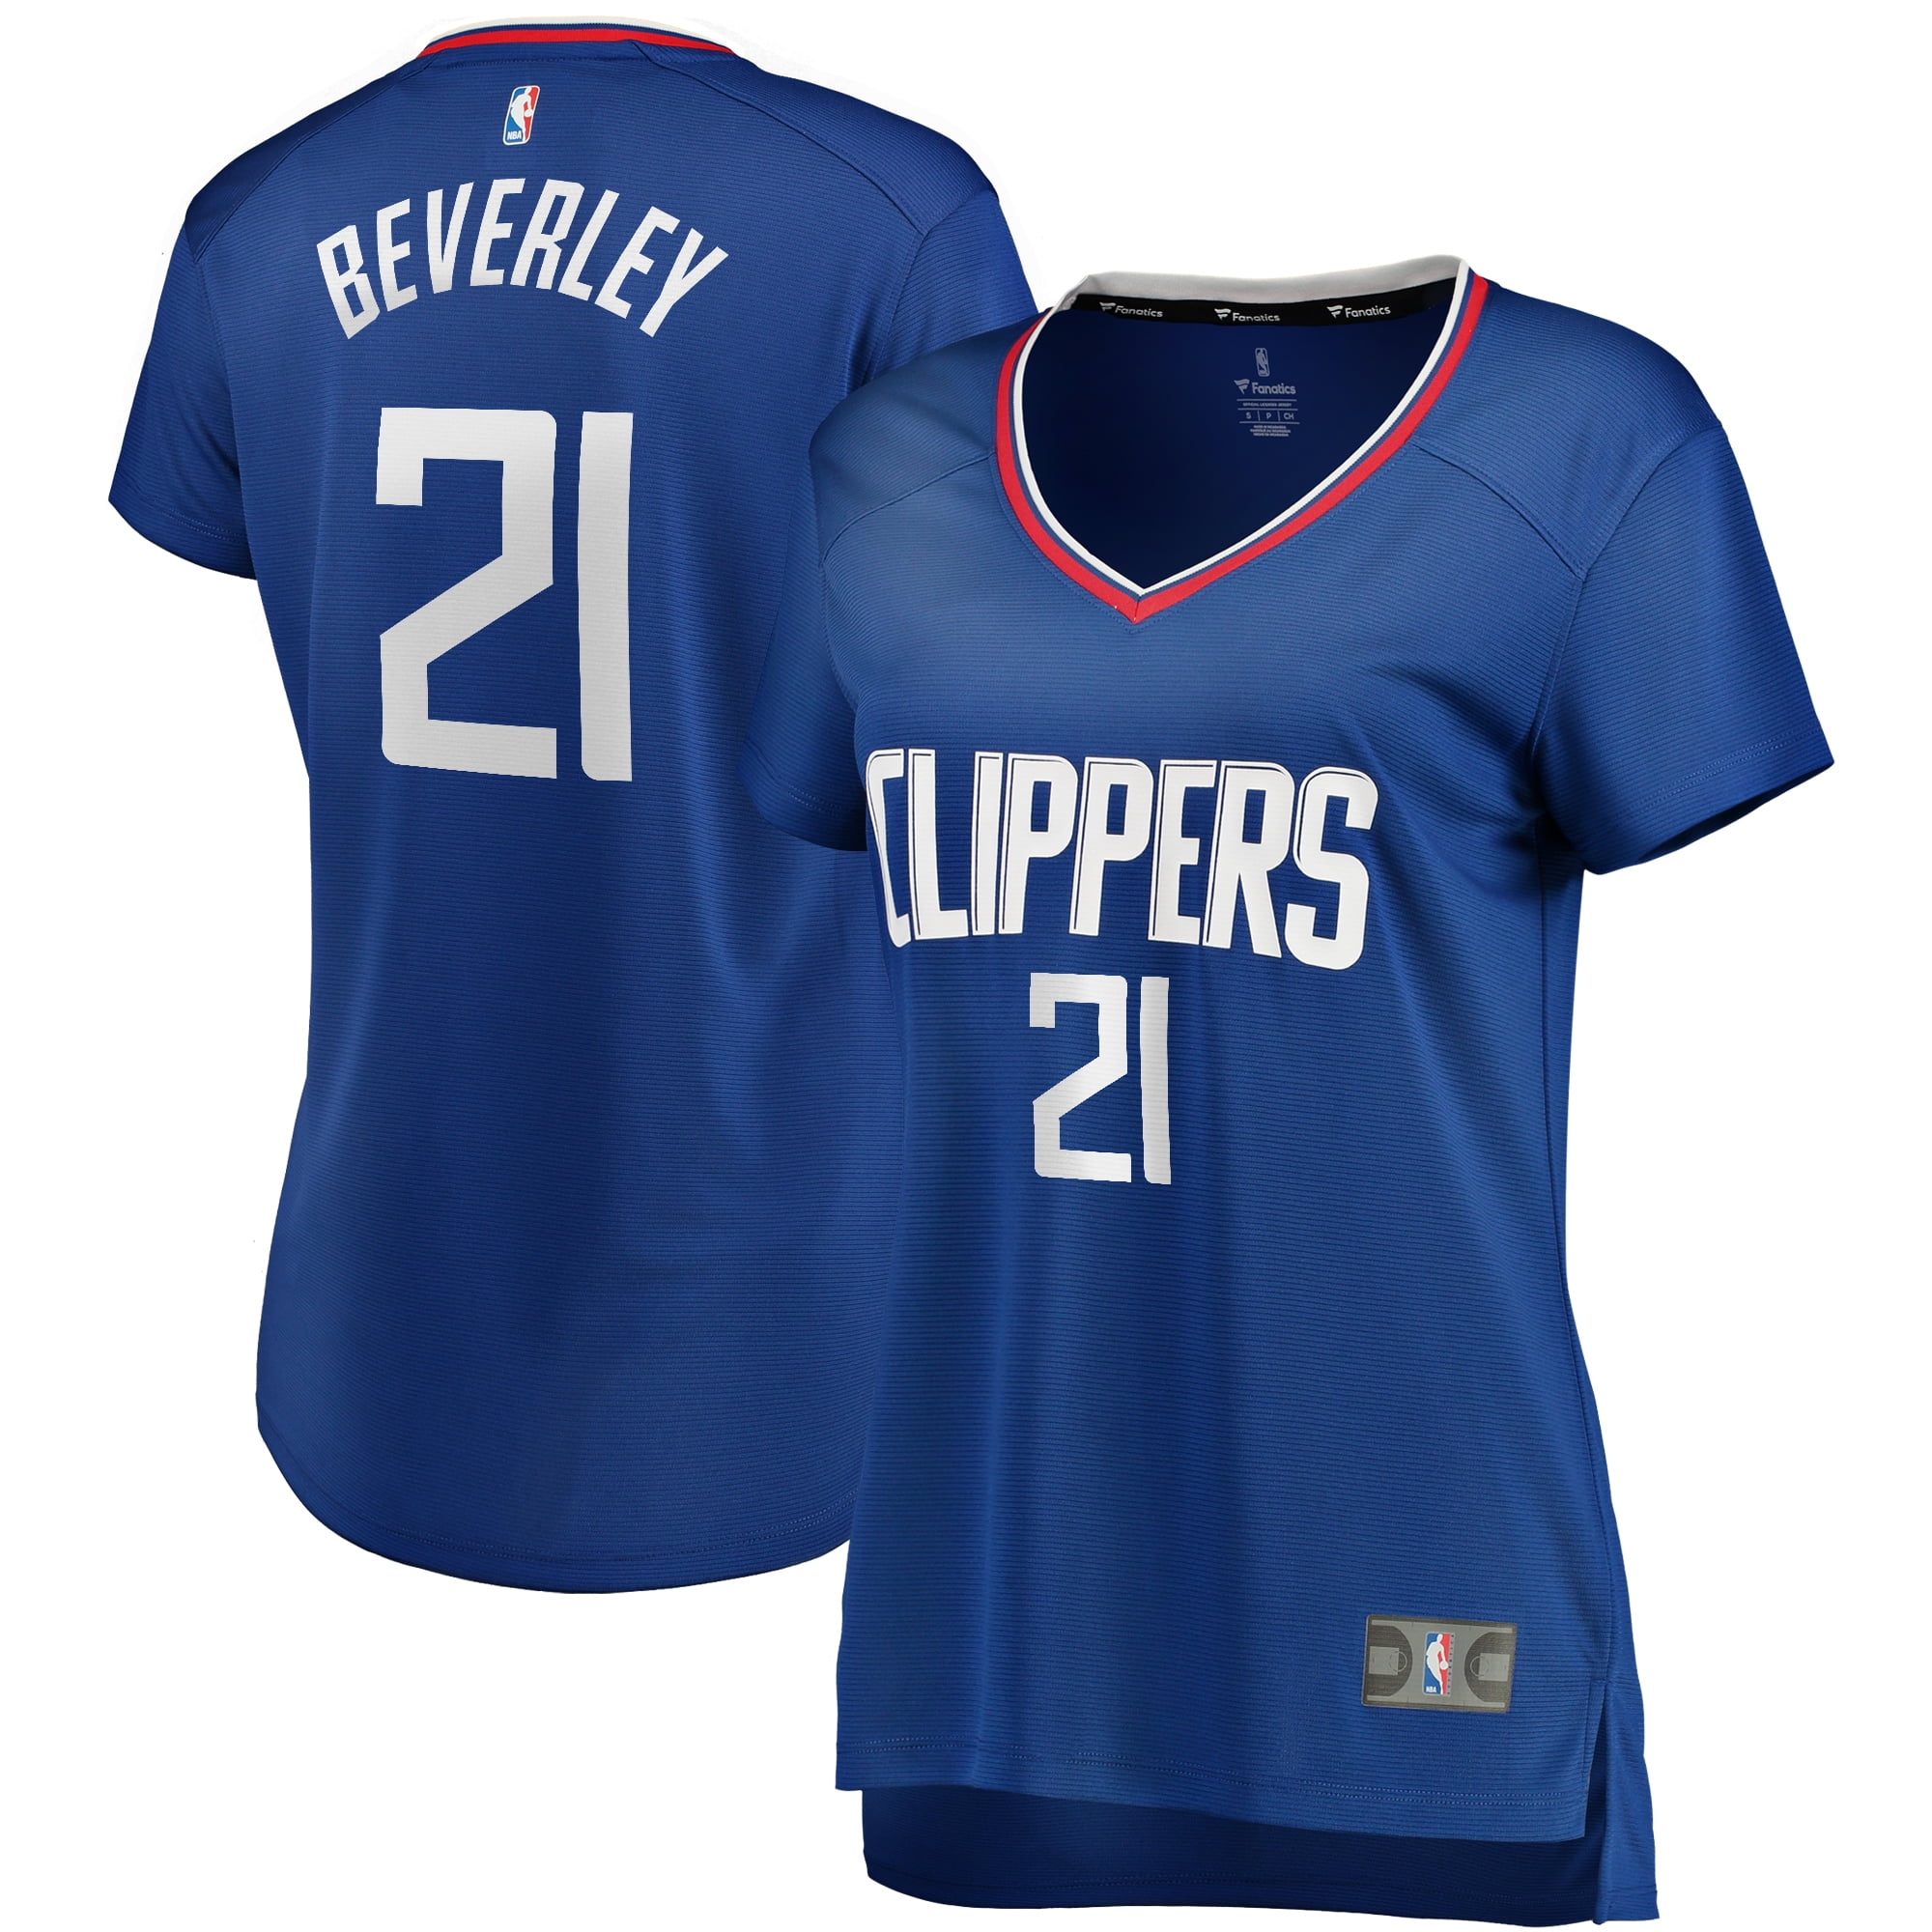 clippers baseball jersey